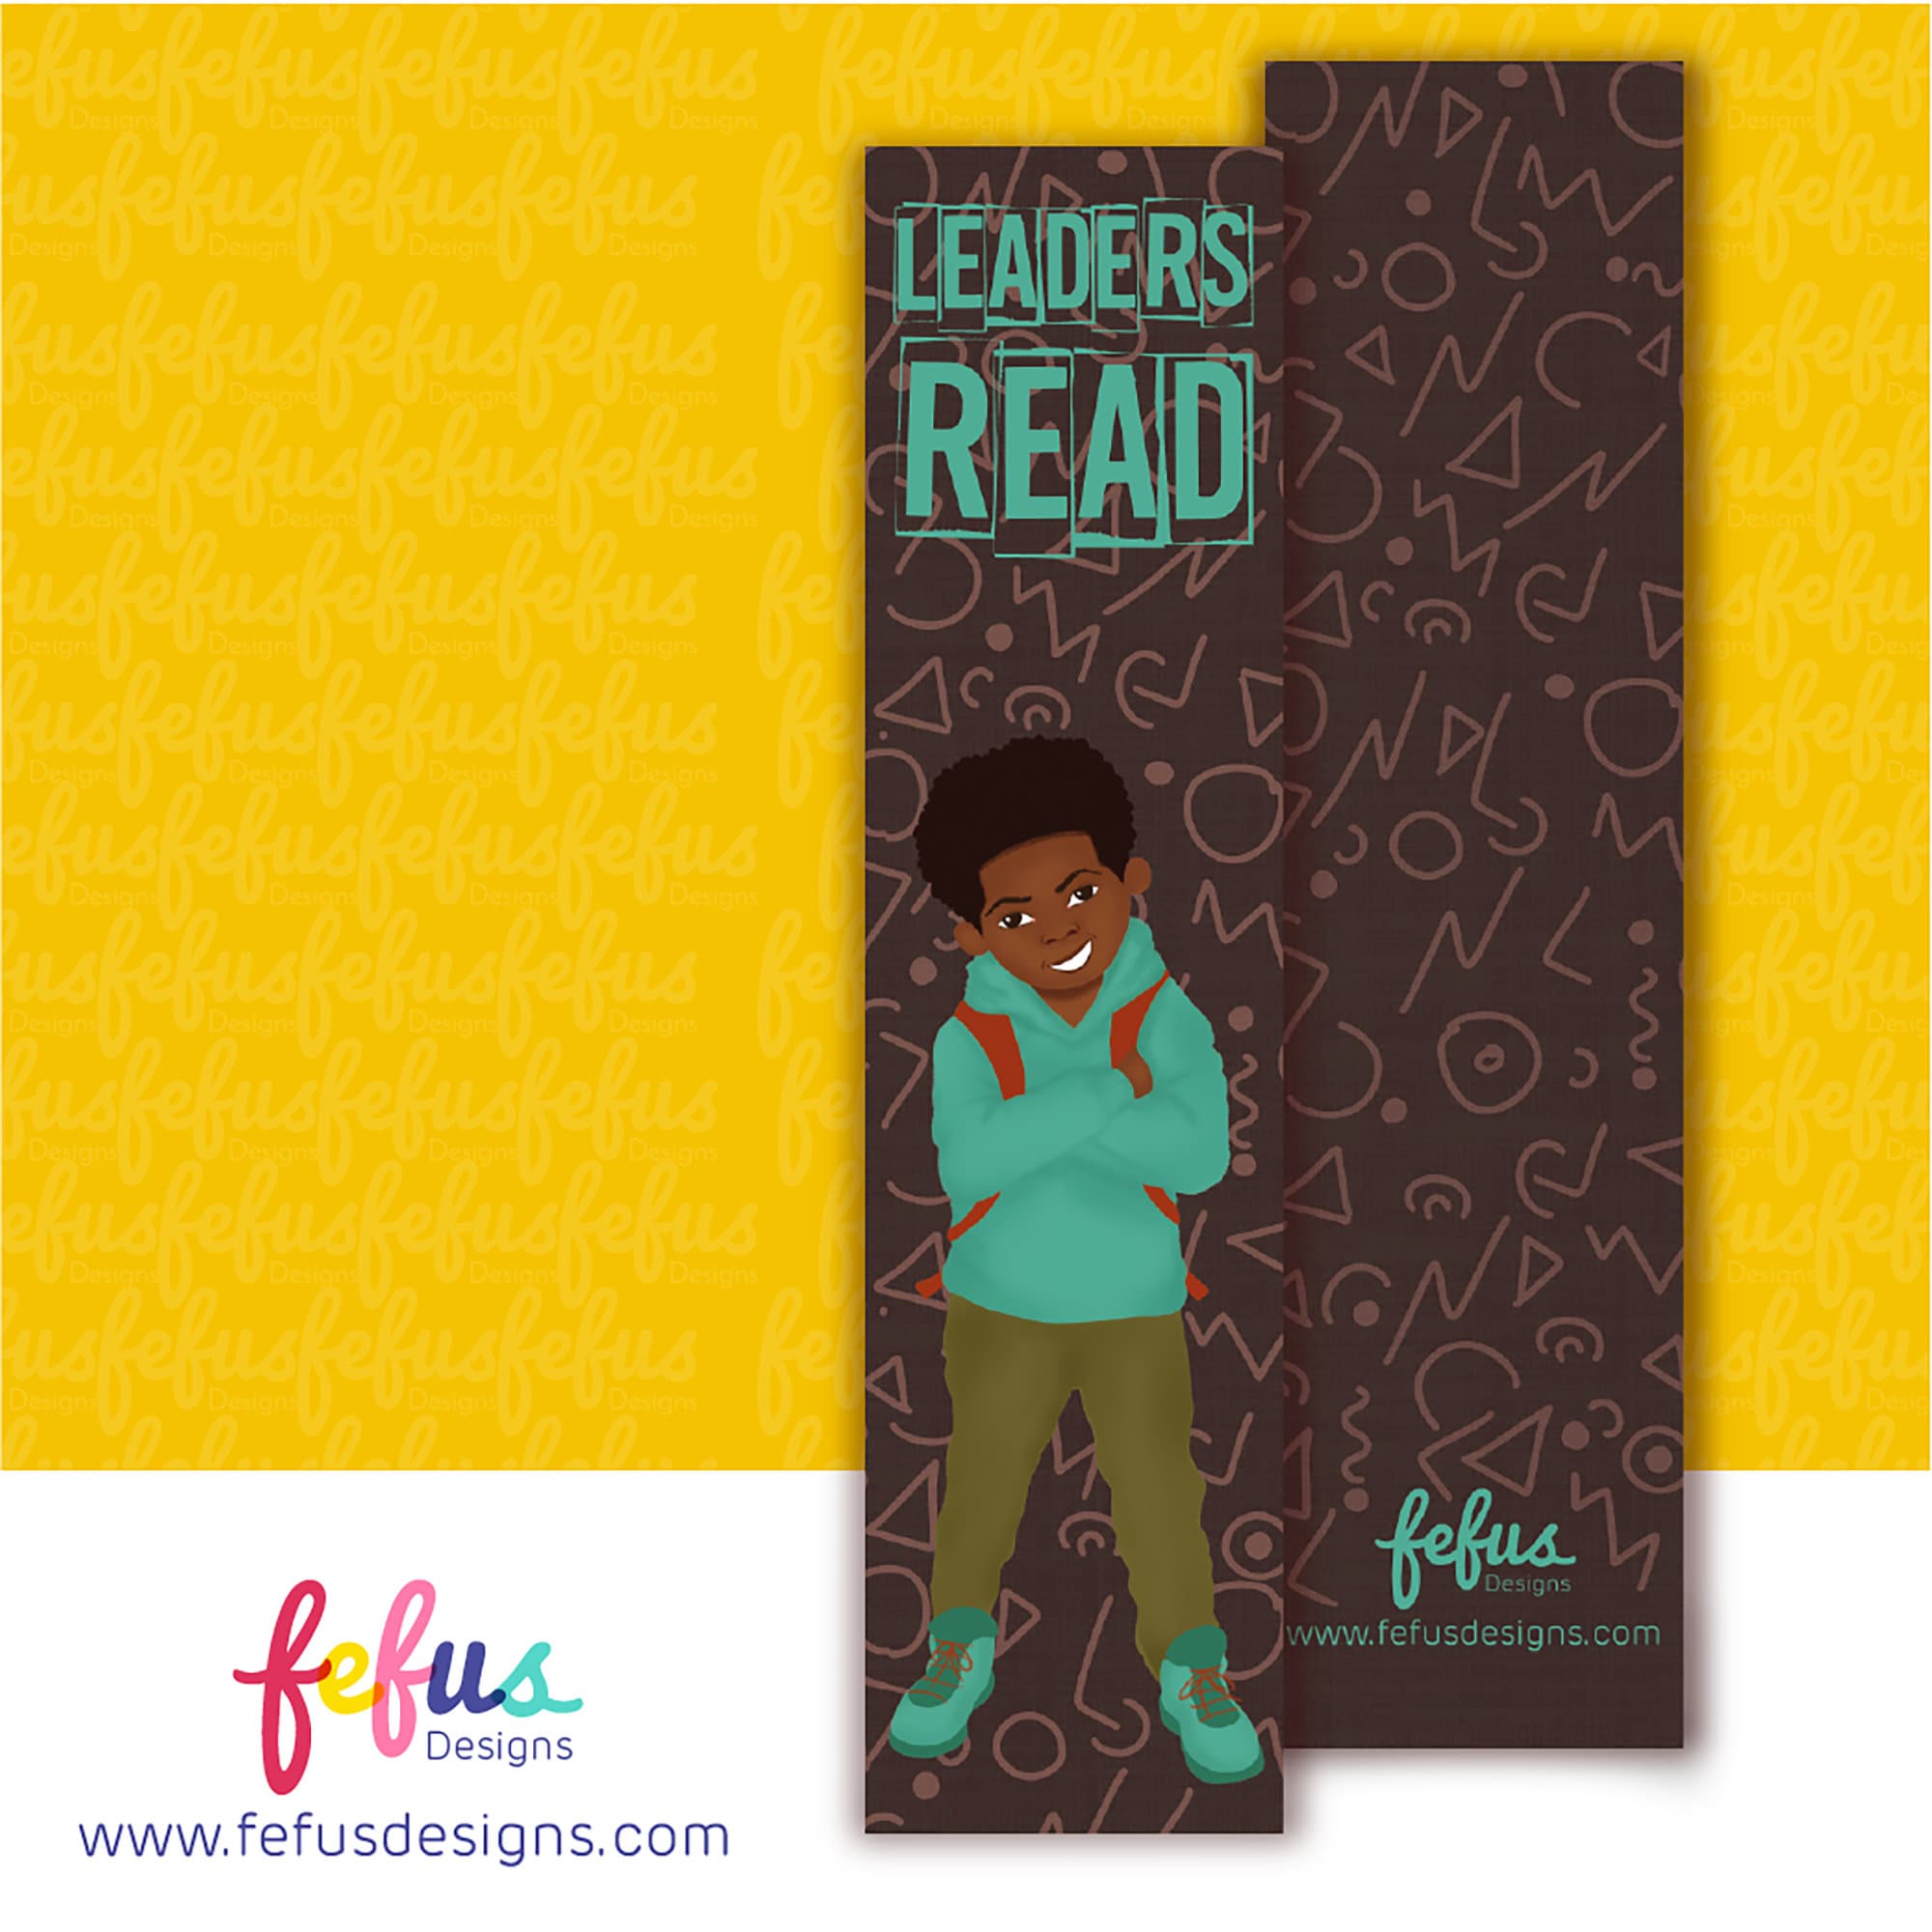 Leaders Read Kids Bookmarks | Diverse Books | Gifts for Bookworms | Readers | Black Brown Boy Joy Art | Empowering Gifts for Boy | Fefus